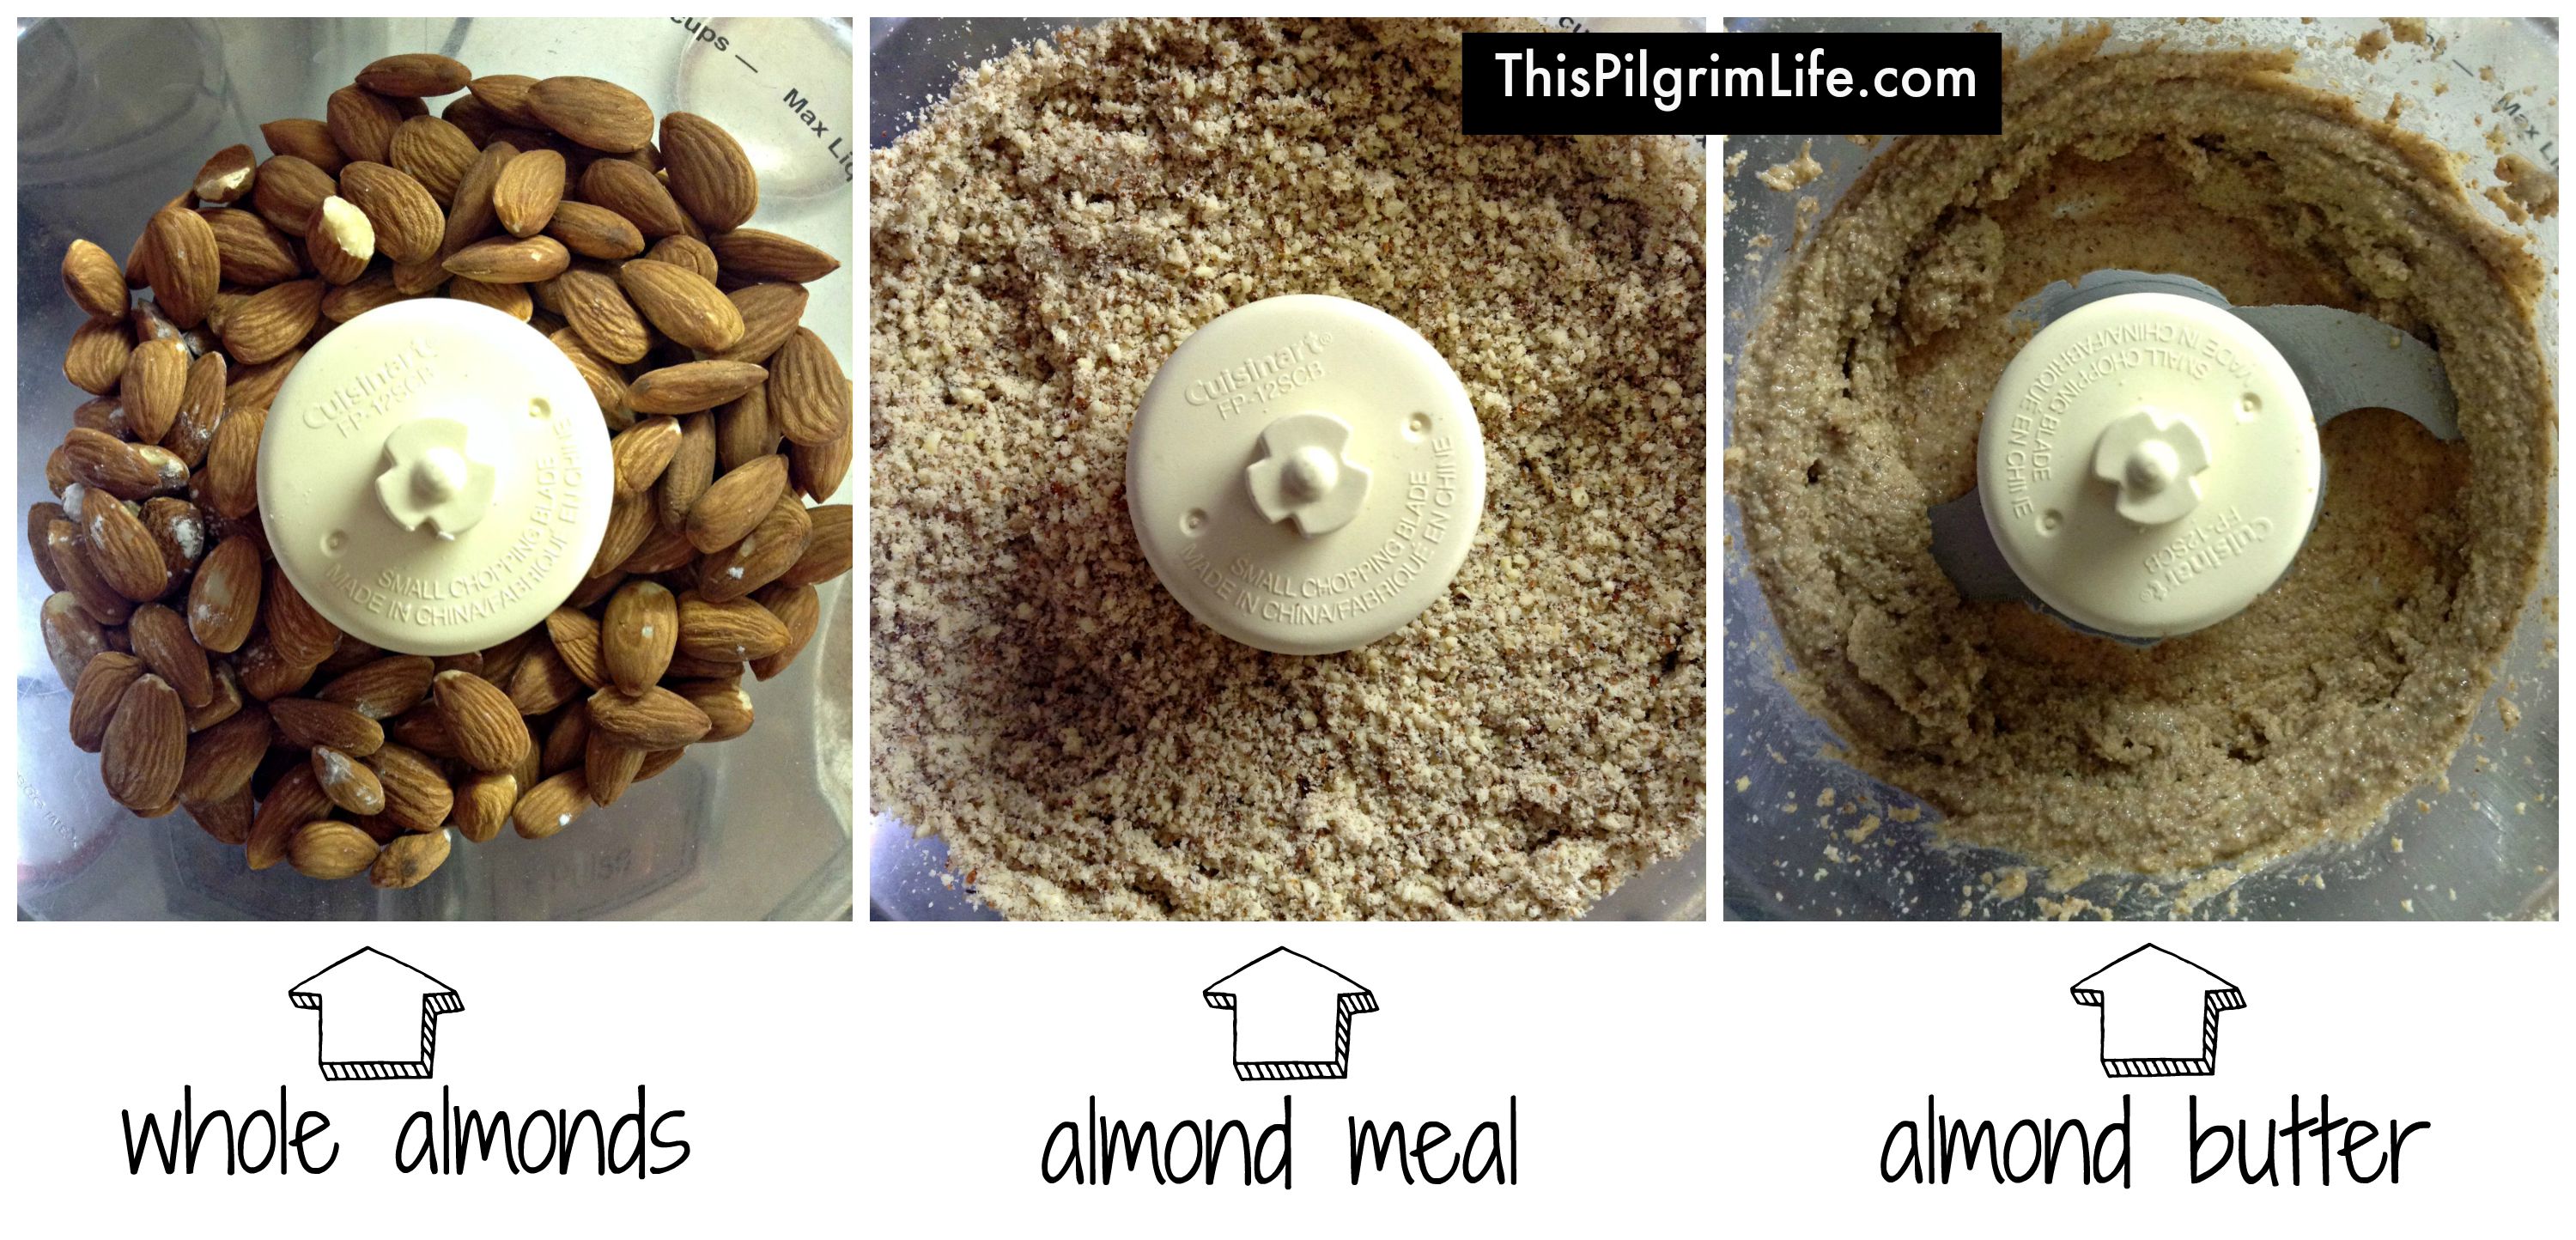 Use a food processor to make almond meal and almond butter.